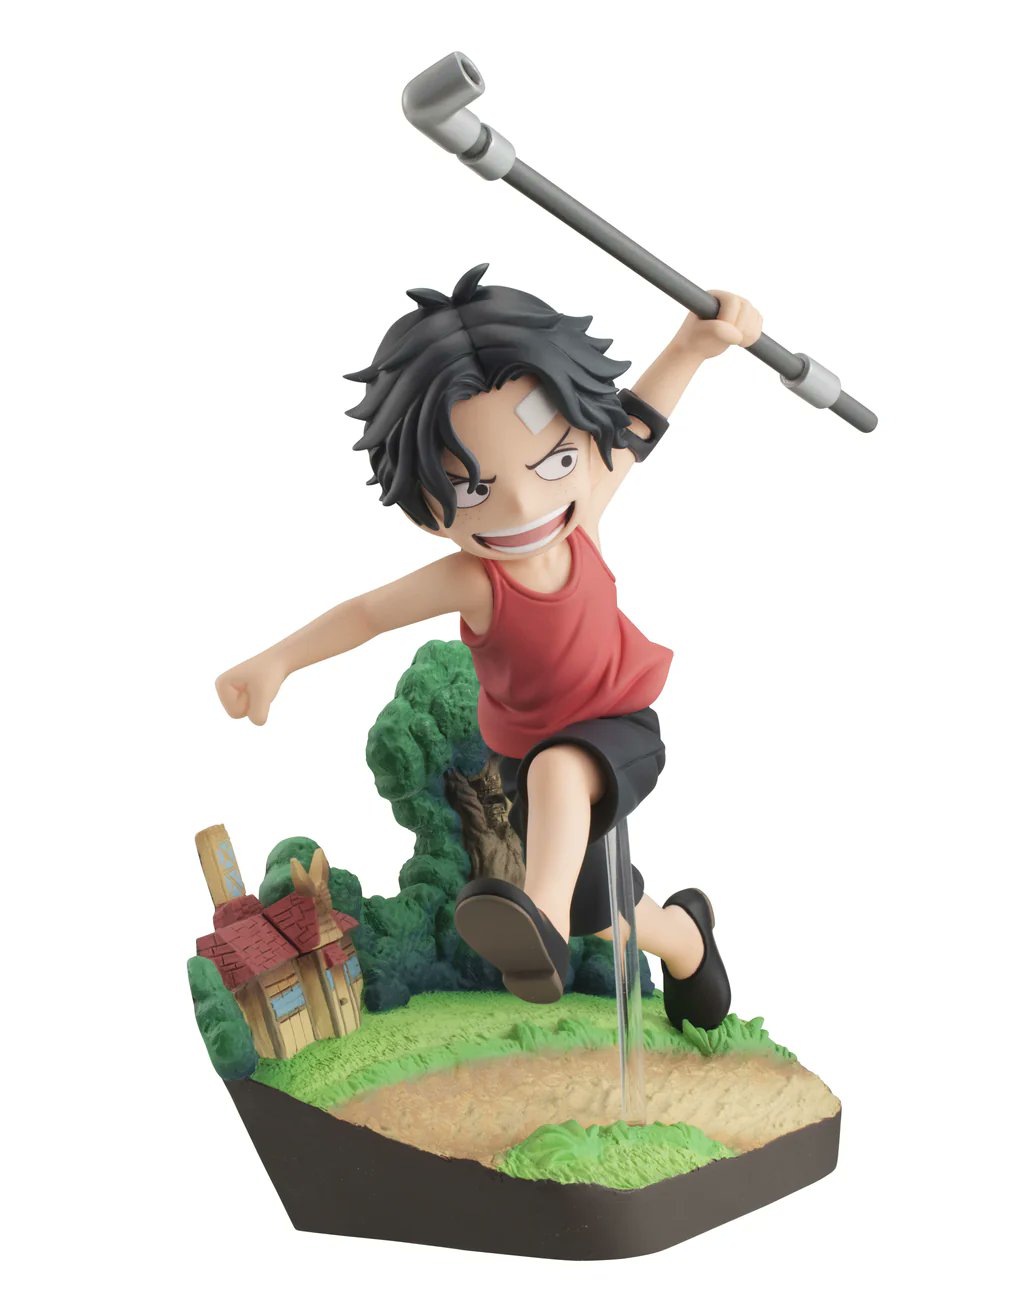 MegaHouse-Official on X: From the ever-popular anime series ONE PIECE  comes a figure of Portgas D. Ace from his childhood! #onepiece #megahouse    / X